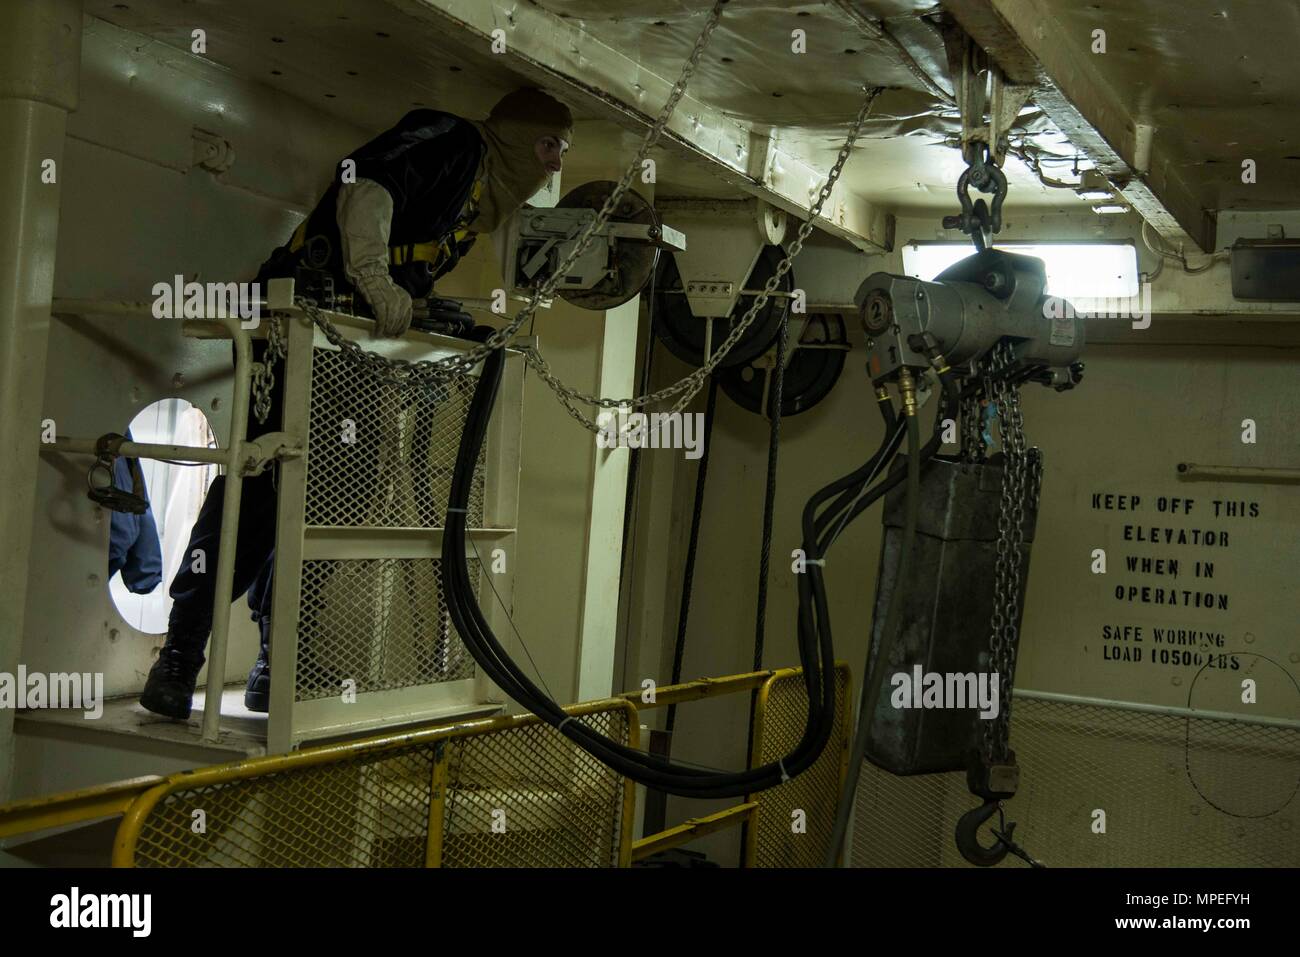 170214-N-QI061-141  ATLANTIC OCEAN (Feb. 14, 2017) Aviation Ordnanceman Airman Jeremy Voyles, from Kingston, Okla., maneuvers a 2-ton pneumatic hoist in a weapons elevator aboard the aircraft carrier USS Dwight D. Eisenhower (CVN 69) (Ike) during a general quarters drill. Ike is currently conducting aircraft carrier qualifications during the sustainment phase of the Optimized Fleet Response Plan (OFRP). (U.S. Navy photo by Mass Communication Specialist 3rd Class Nathan T. Beard) Stock Photo